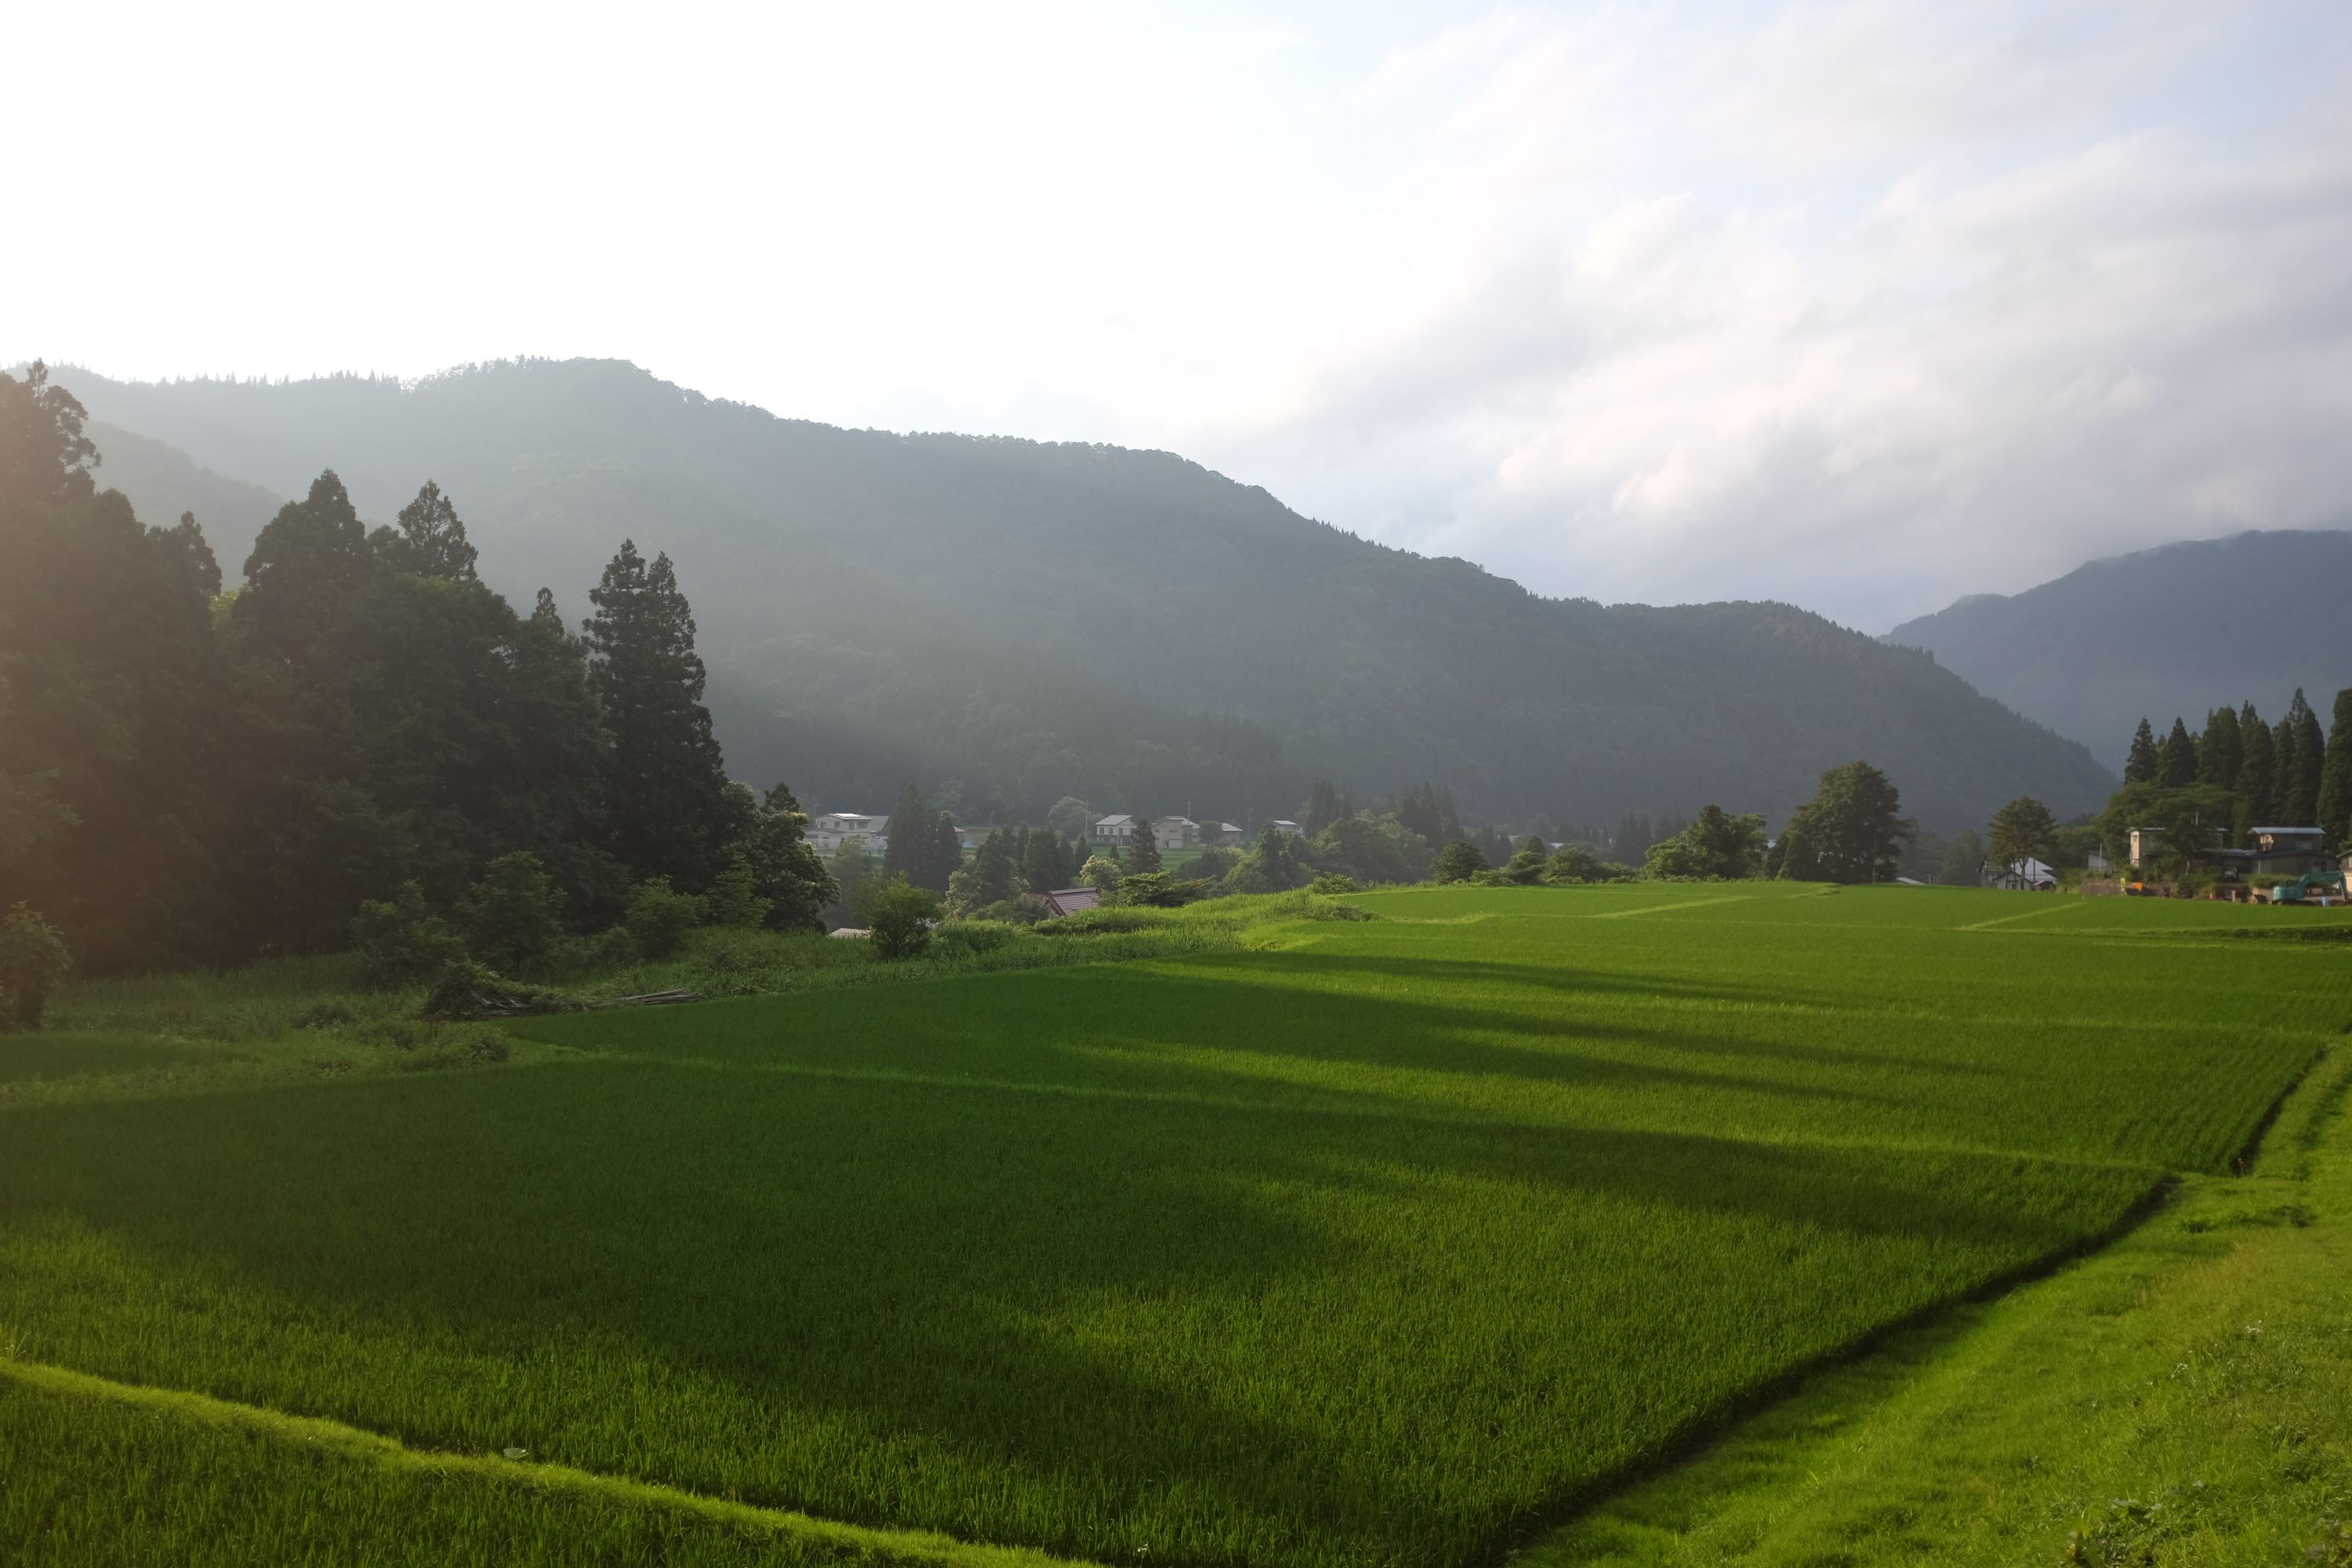 Panorama of a valley with bright green rice fields and forested hills.